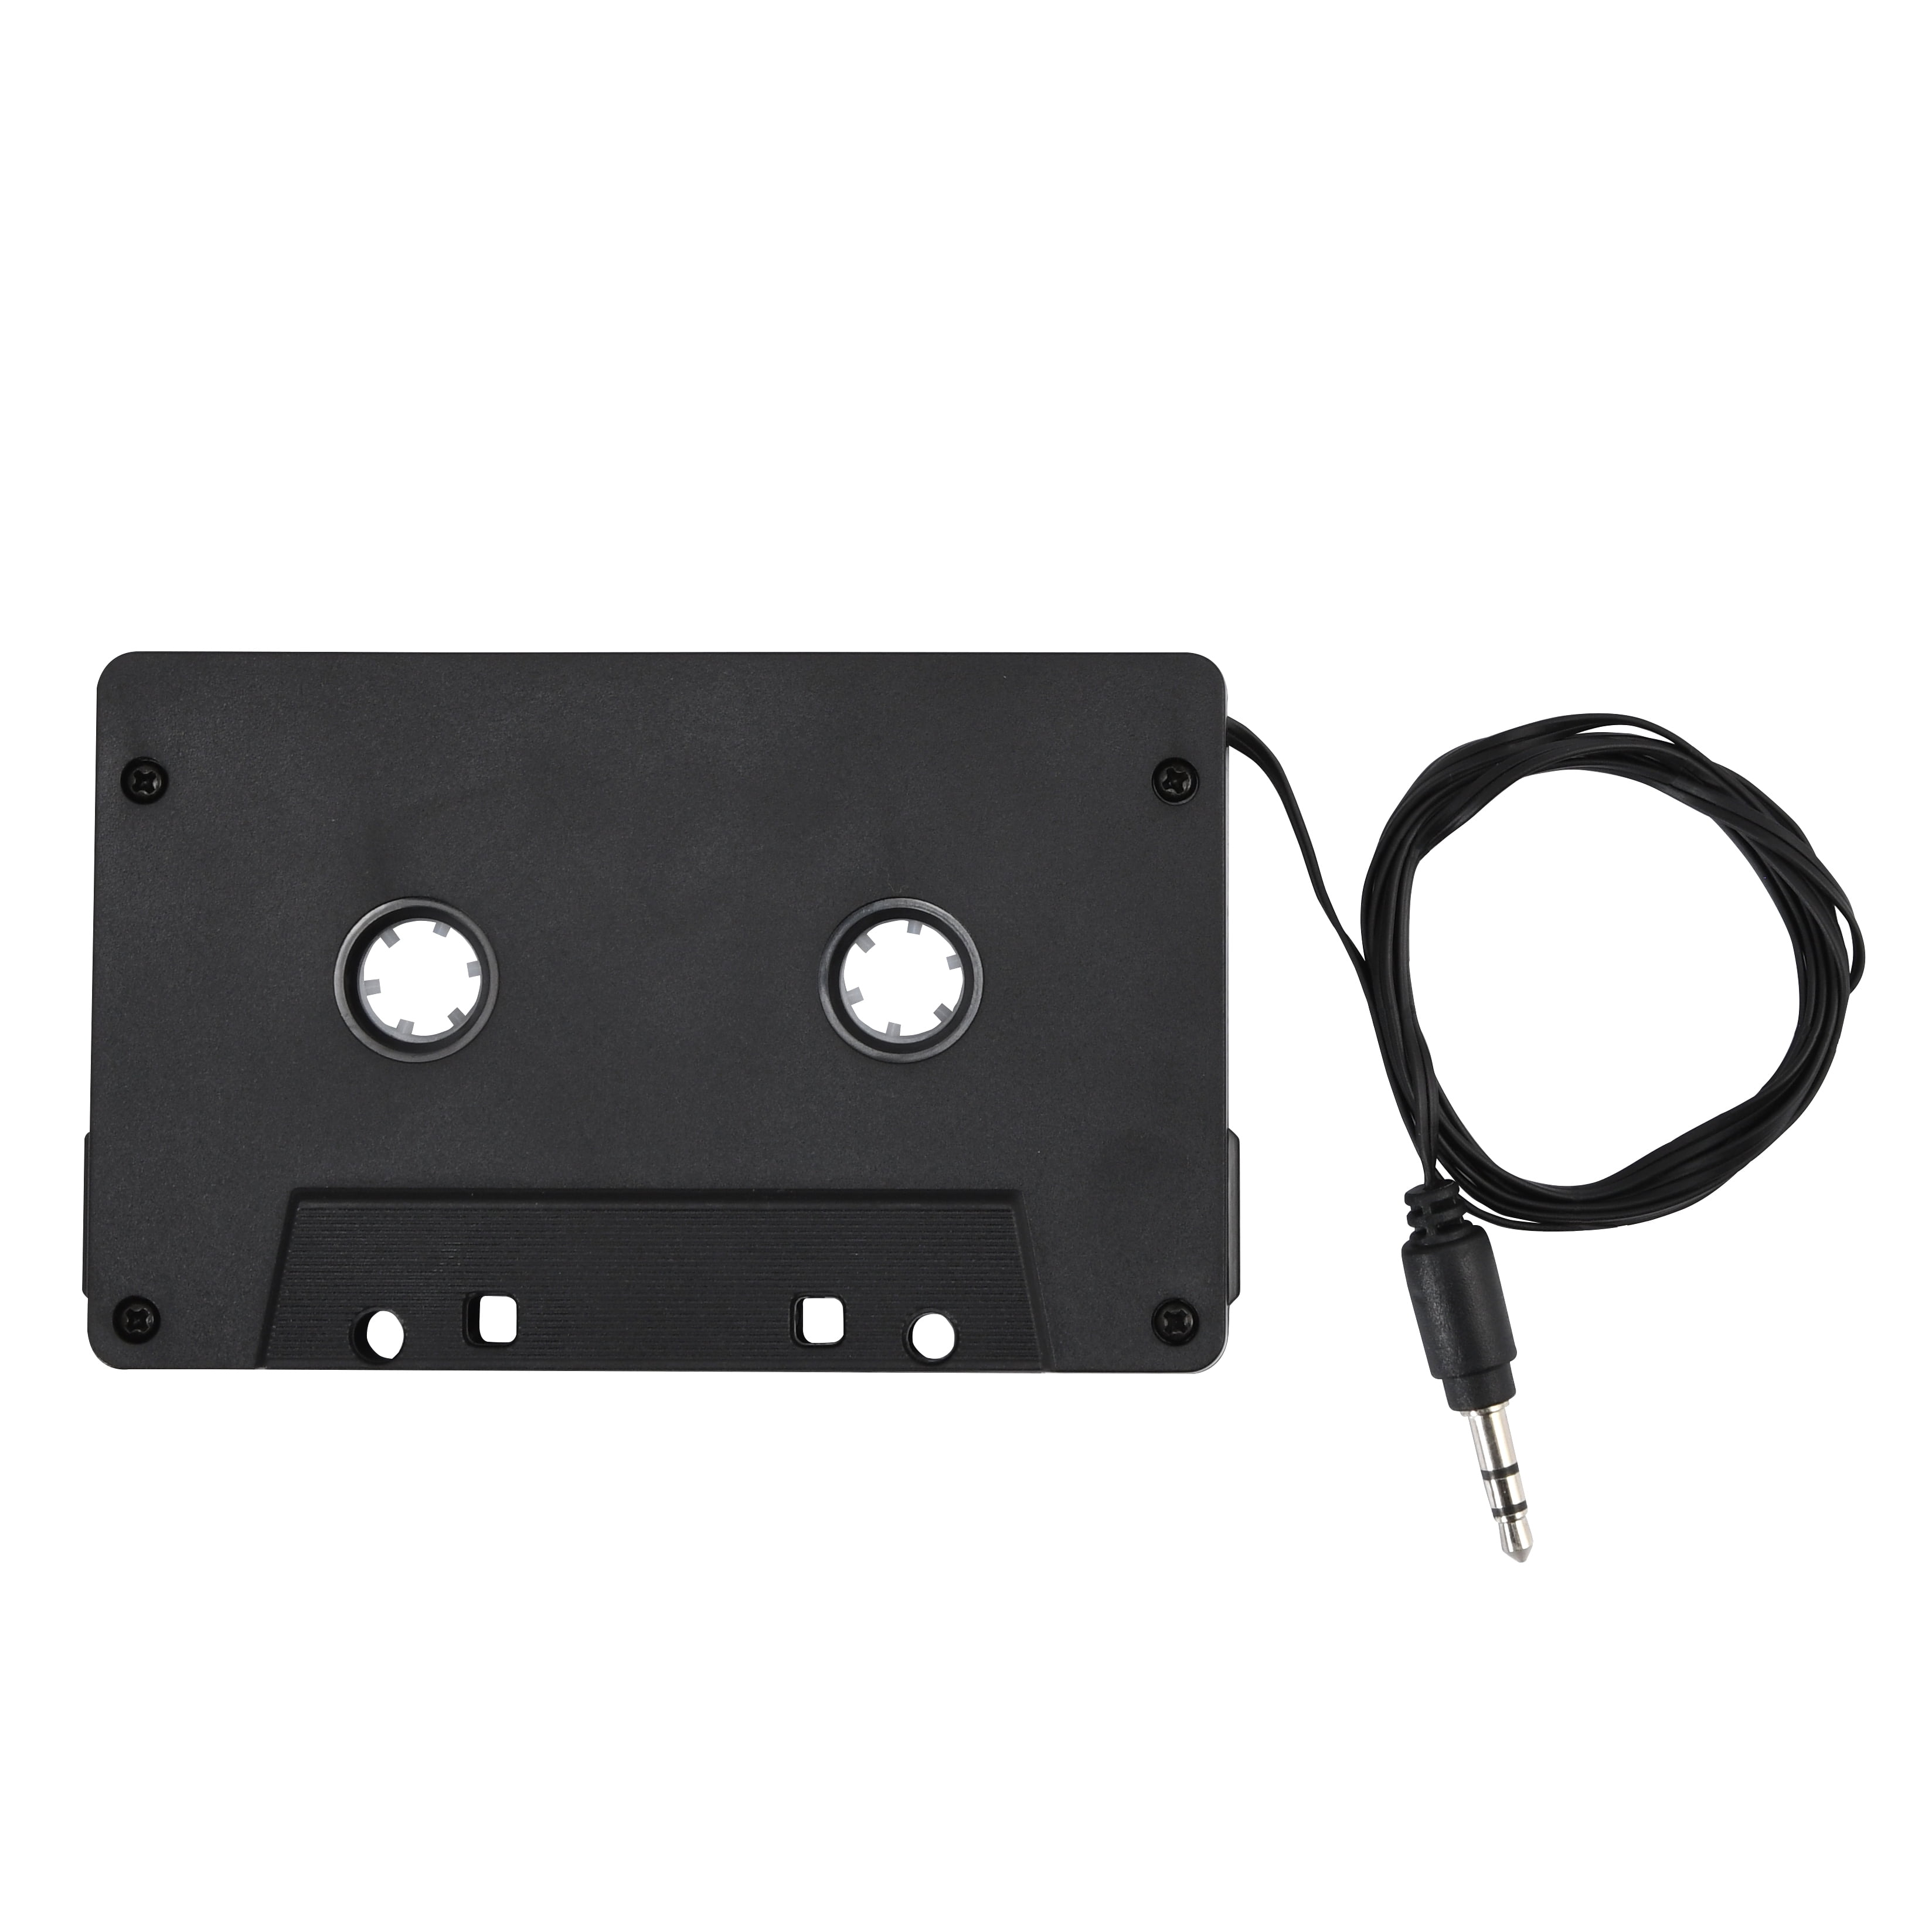 onn. Cassette Audio Adapter 3ft with AUX Cable, Play Digital Music from an AUX Source